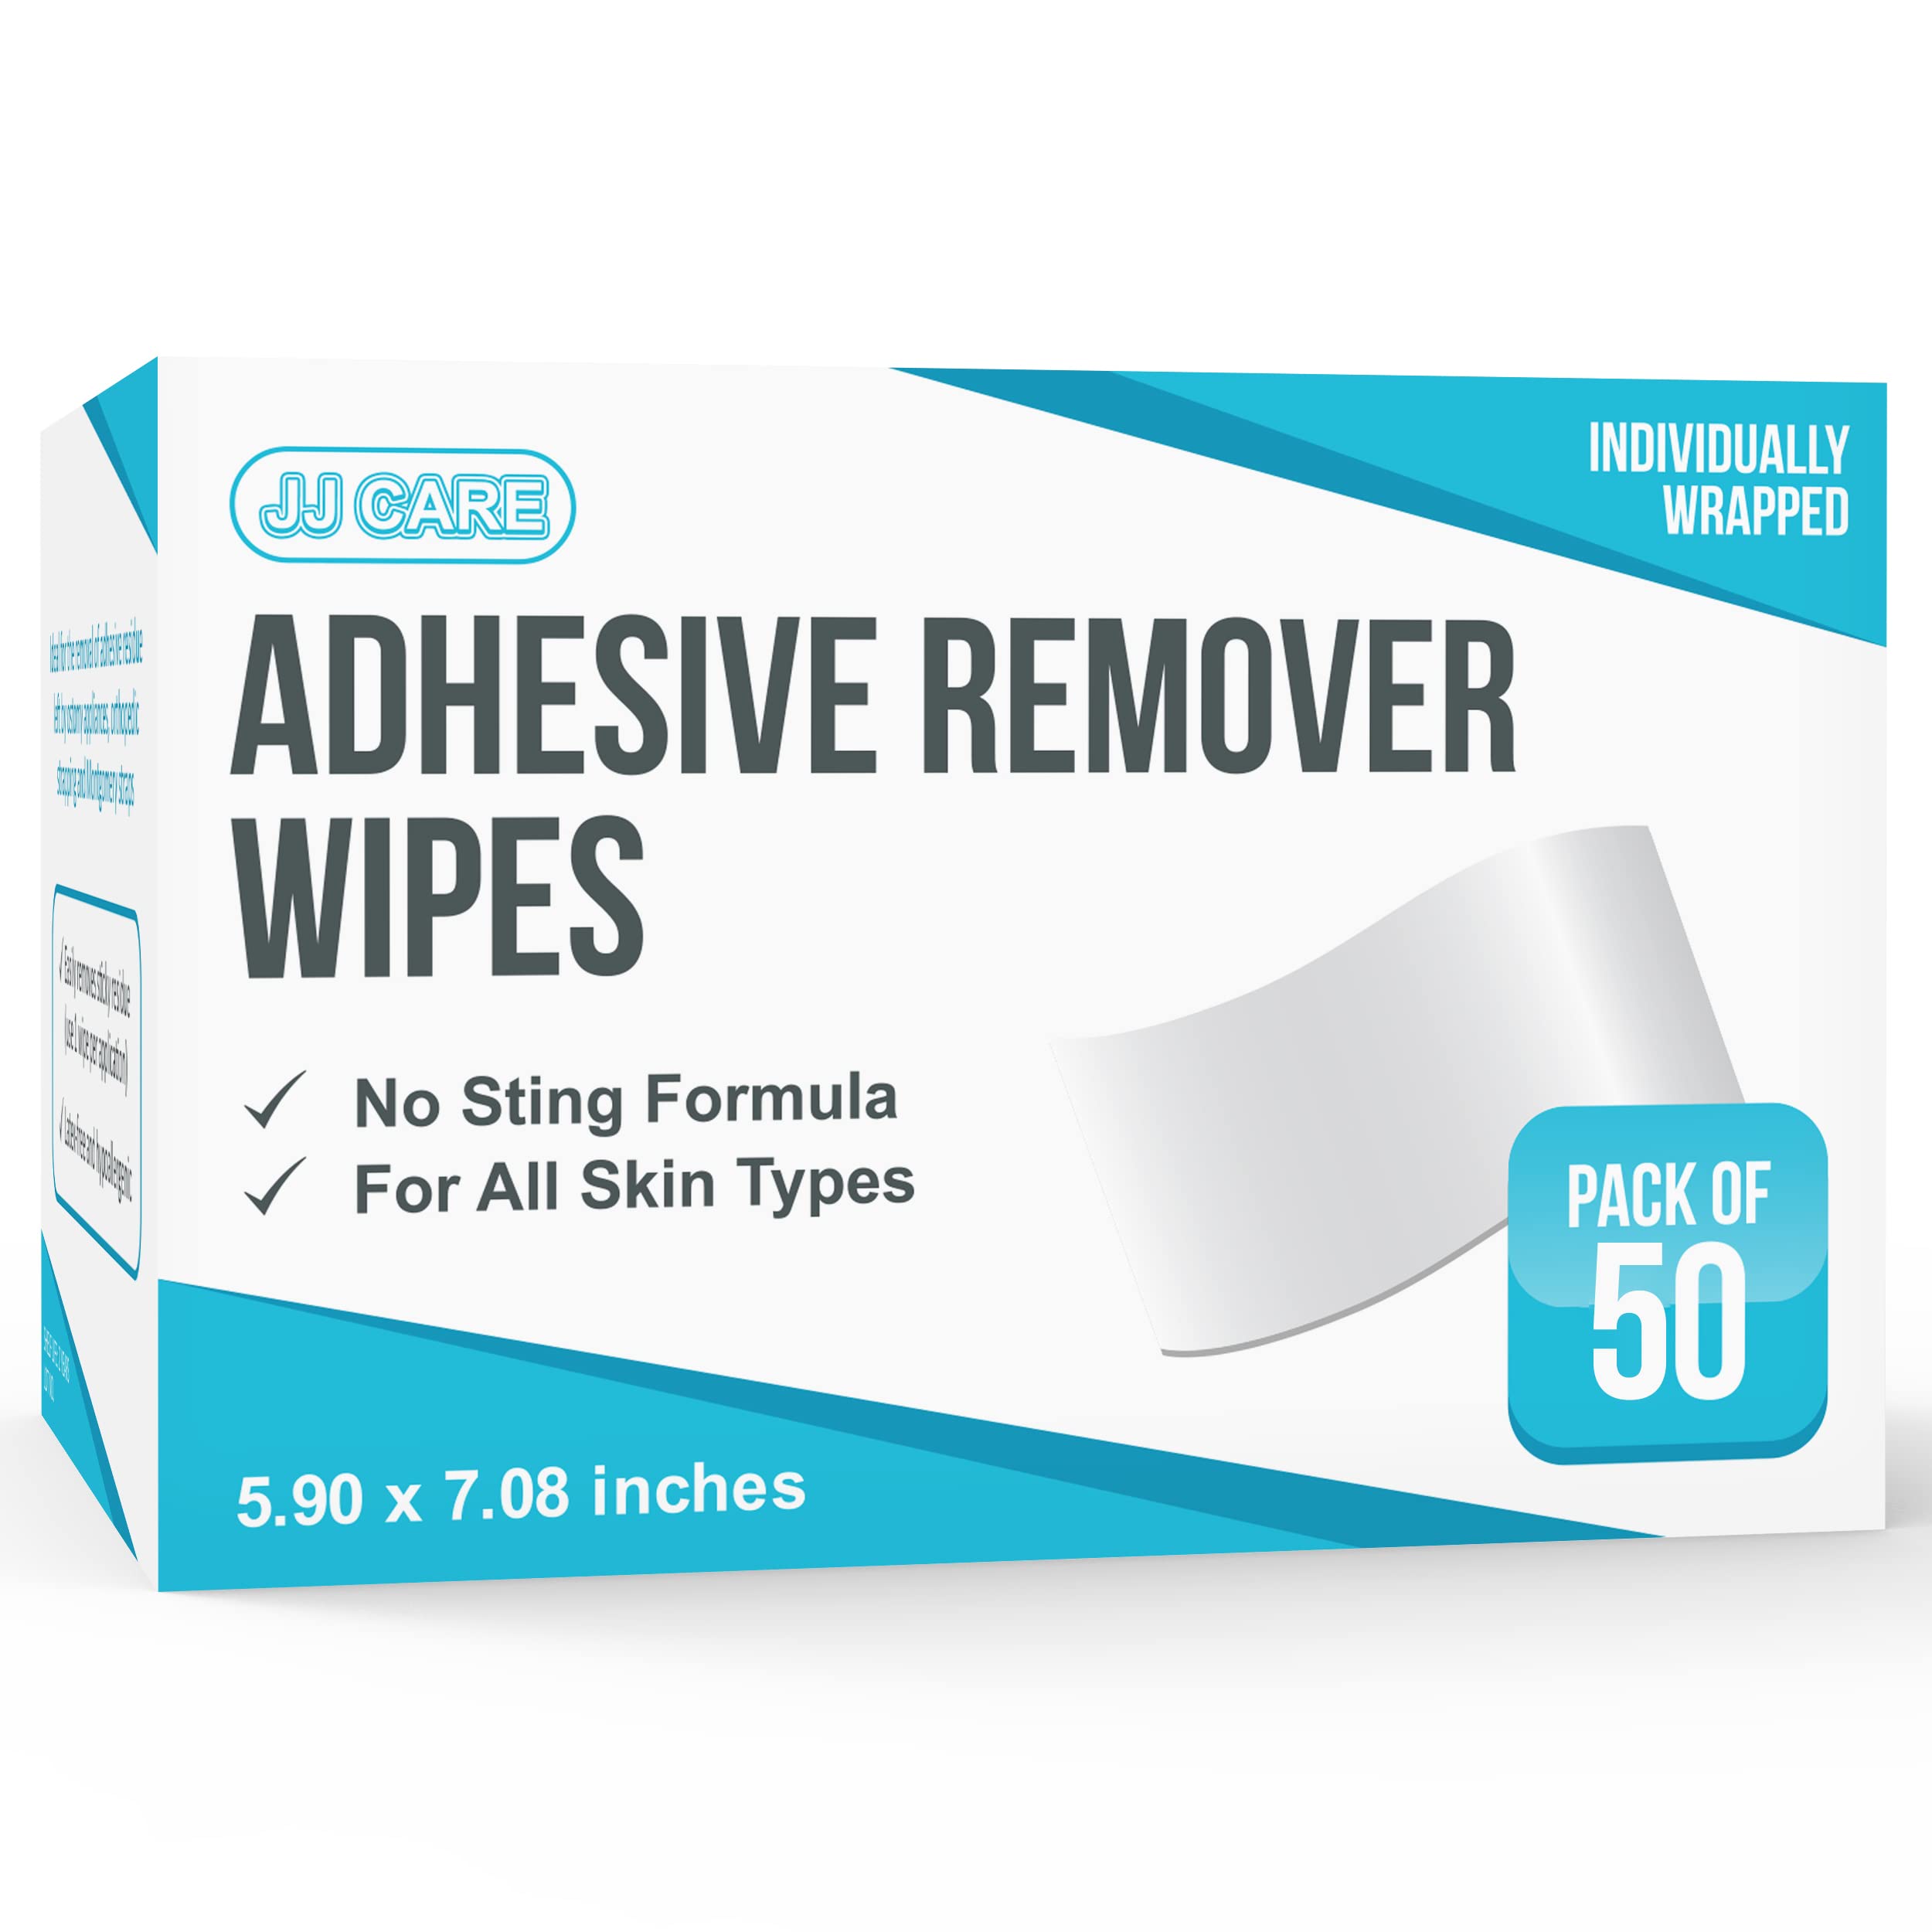 JJ CARE Adhesive Remover Wipes Pack of 50 6x7 Large Stoma Wipes